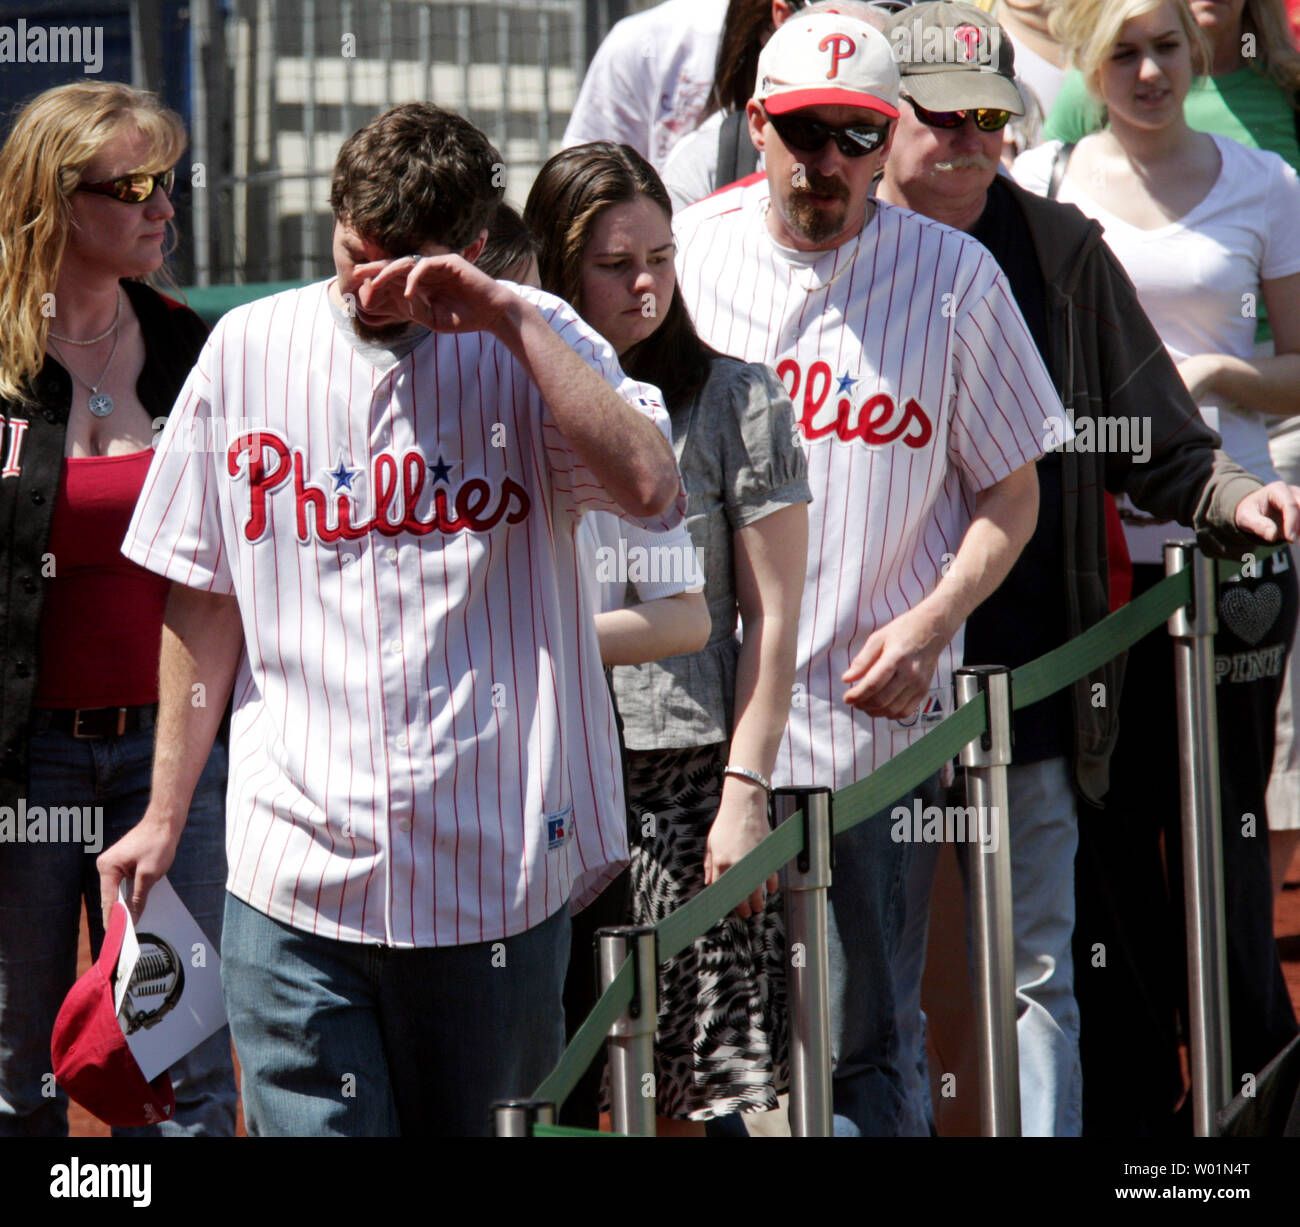 One of the manyf fans who came to Citizens Bank Park April 18, 2009 to pay their respects to longtime Hall of Famer Philadelphia Phillies announcer Harry Kalas fight by tears after passing by his casket..  Kalas,  a Philadelphia Phillies announcer for the past 30 years, died earlier this week at a game.  He is only the second baseball person to lie in state in a professional baseball stadium since Babe Ruth in 1948.   (UPI Photo/John Anderson) Stock Photo